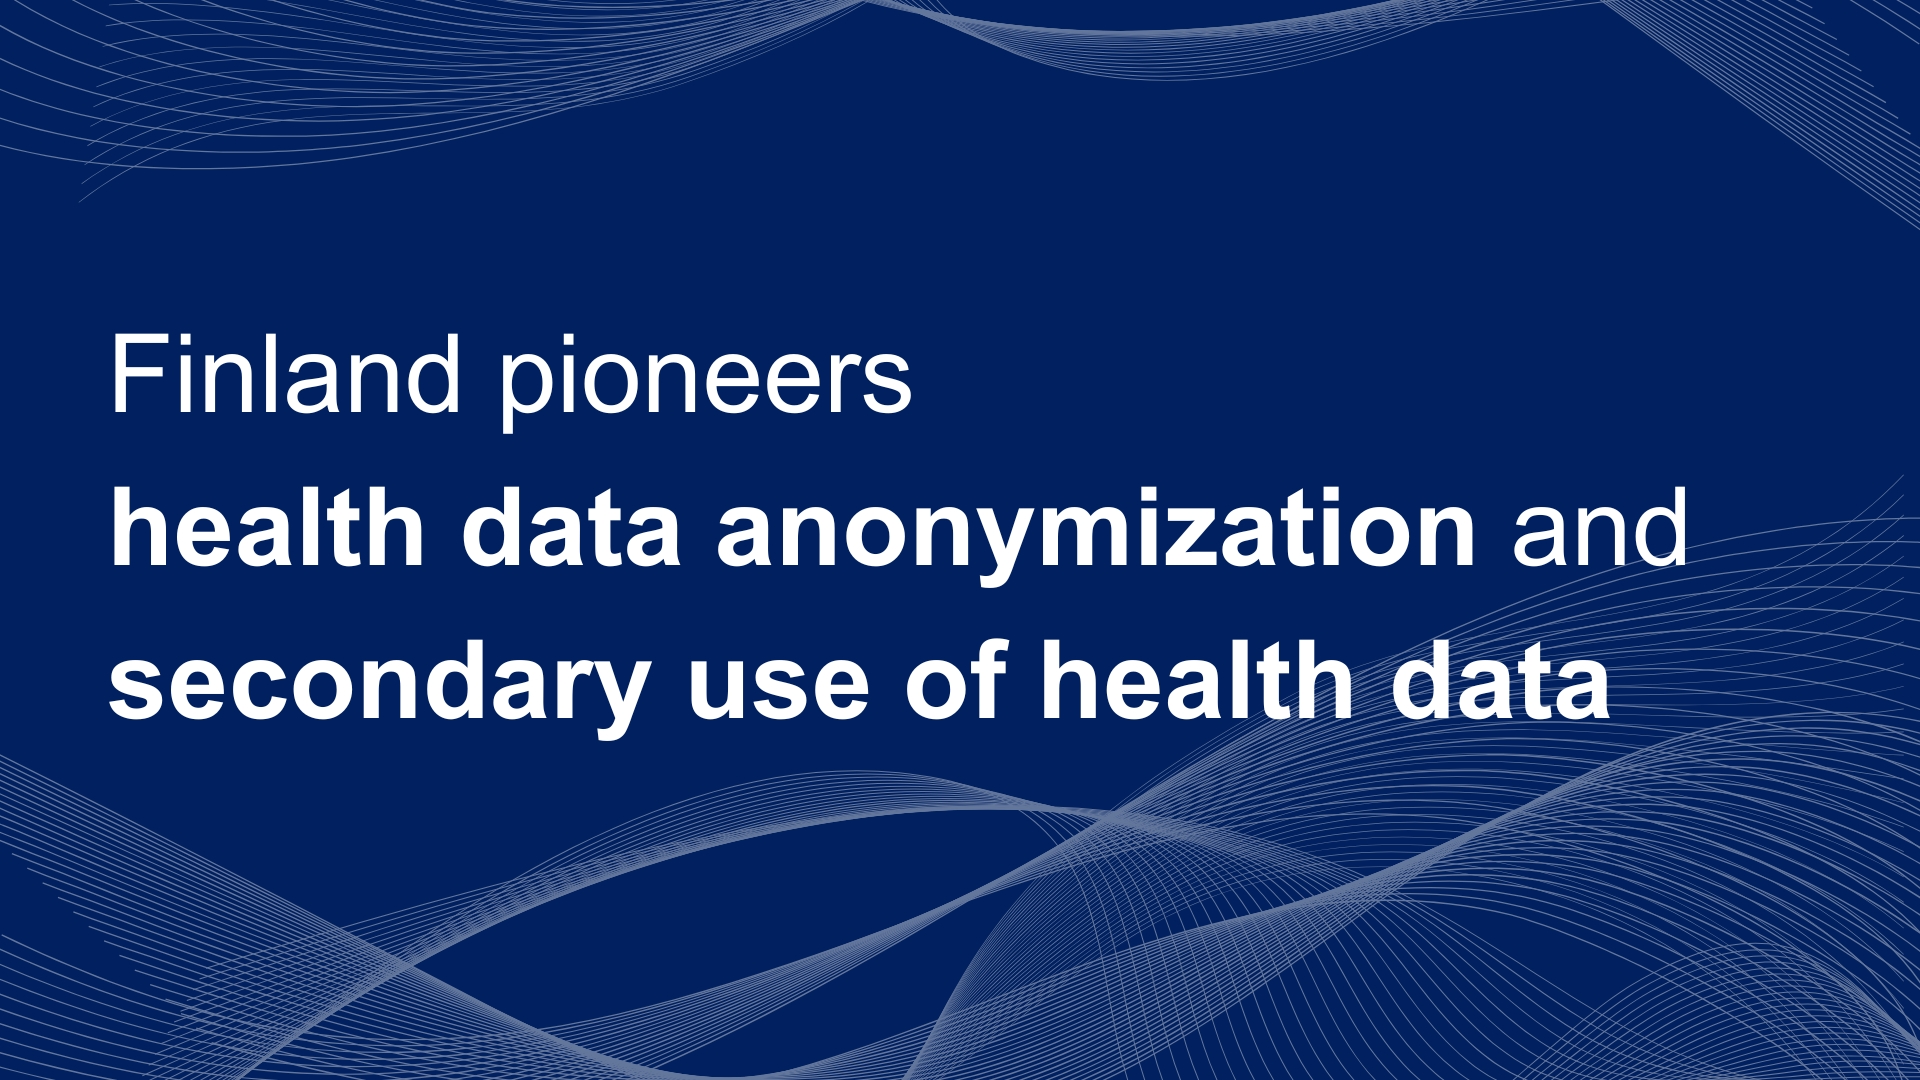 Finland pioneers health data anonymization and secondary use of health data